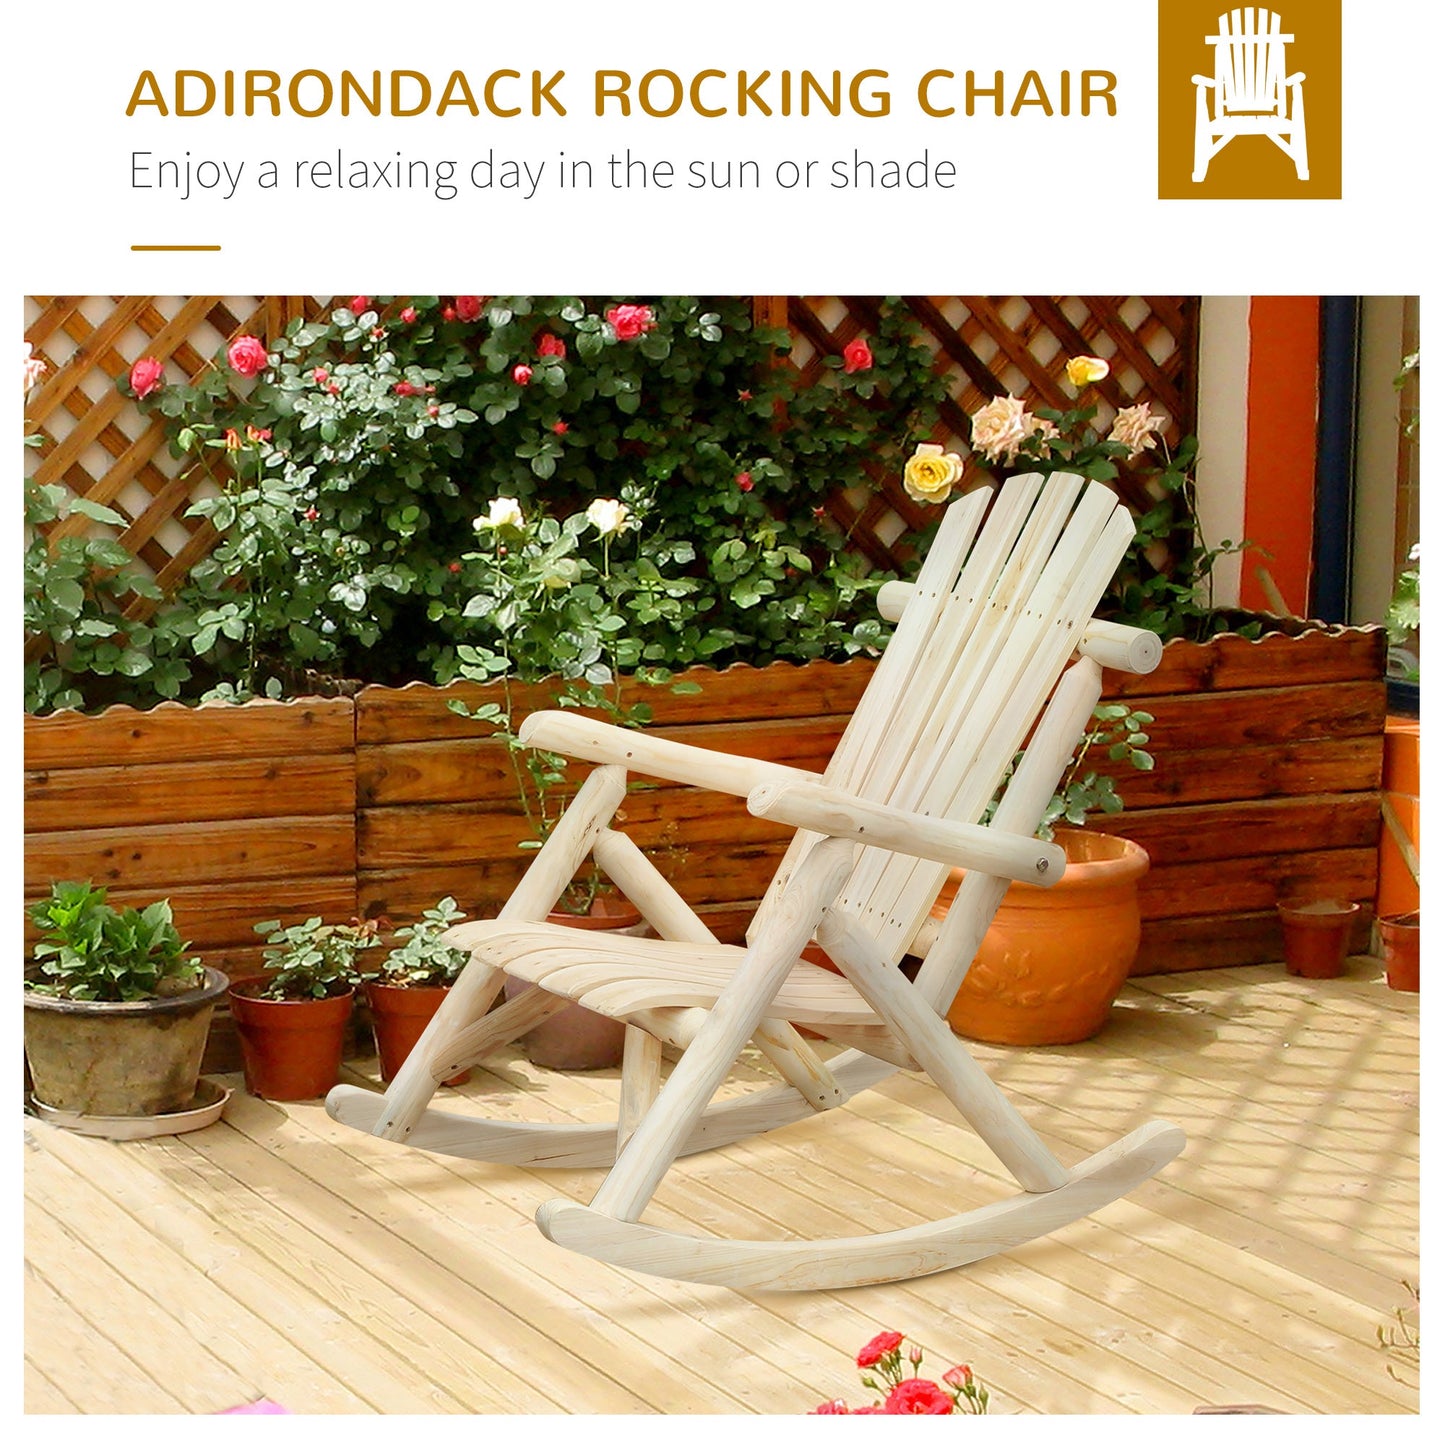 Outdoor and Garden-Wooden Adirondack Rocking Chair, Outdoor Rustic Log Rocker with Slatted Design for Patio, Natural - Outdoor Style Company